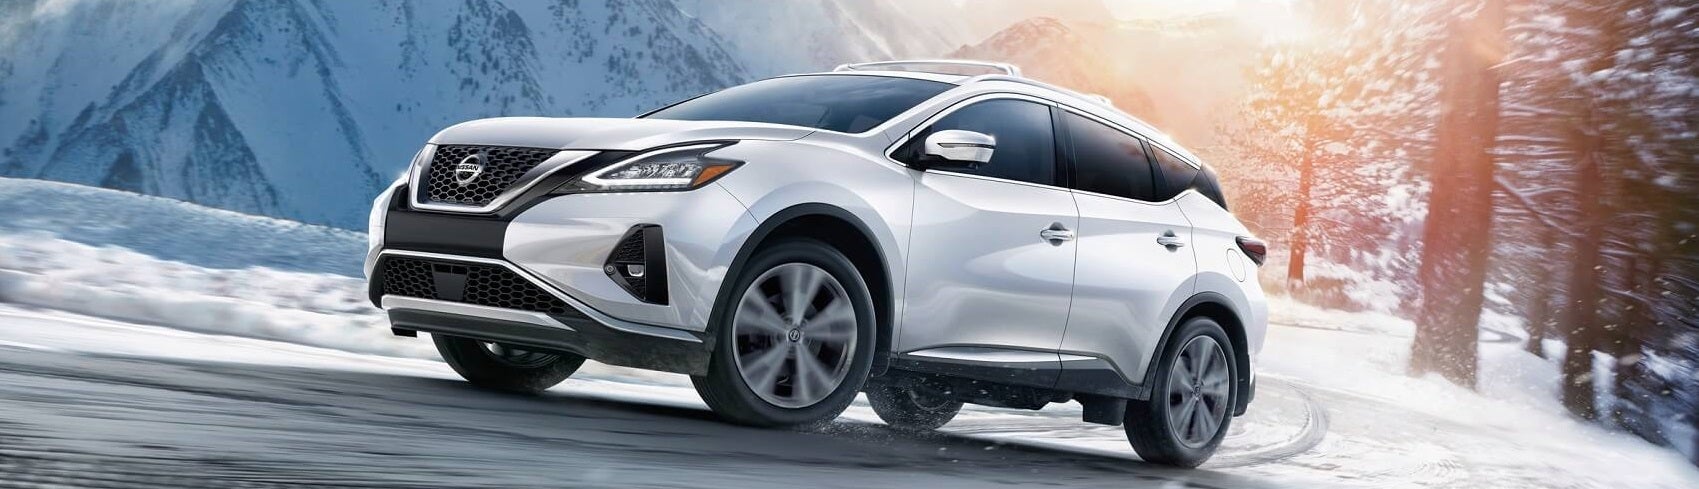 Nissan Murano Lease Deals